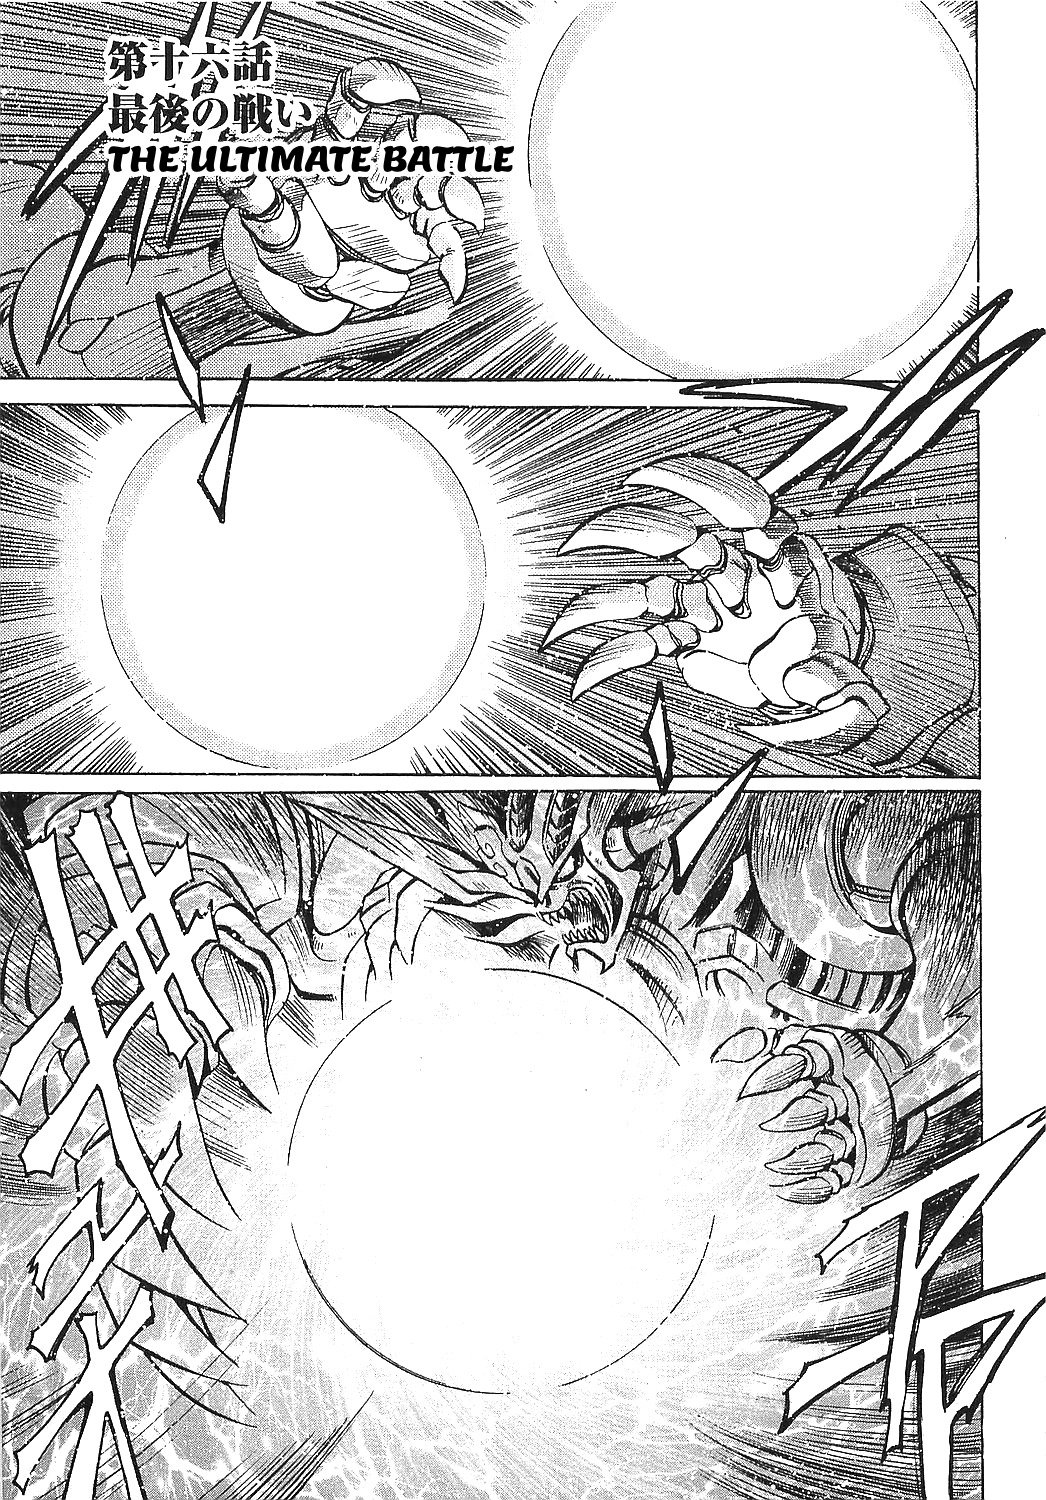 Getter Robo Hien - The Earth Suicide Vol.3 Chapter 16: The Ultimate Battle